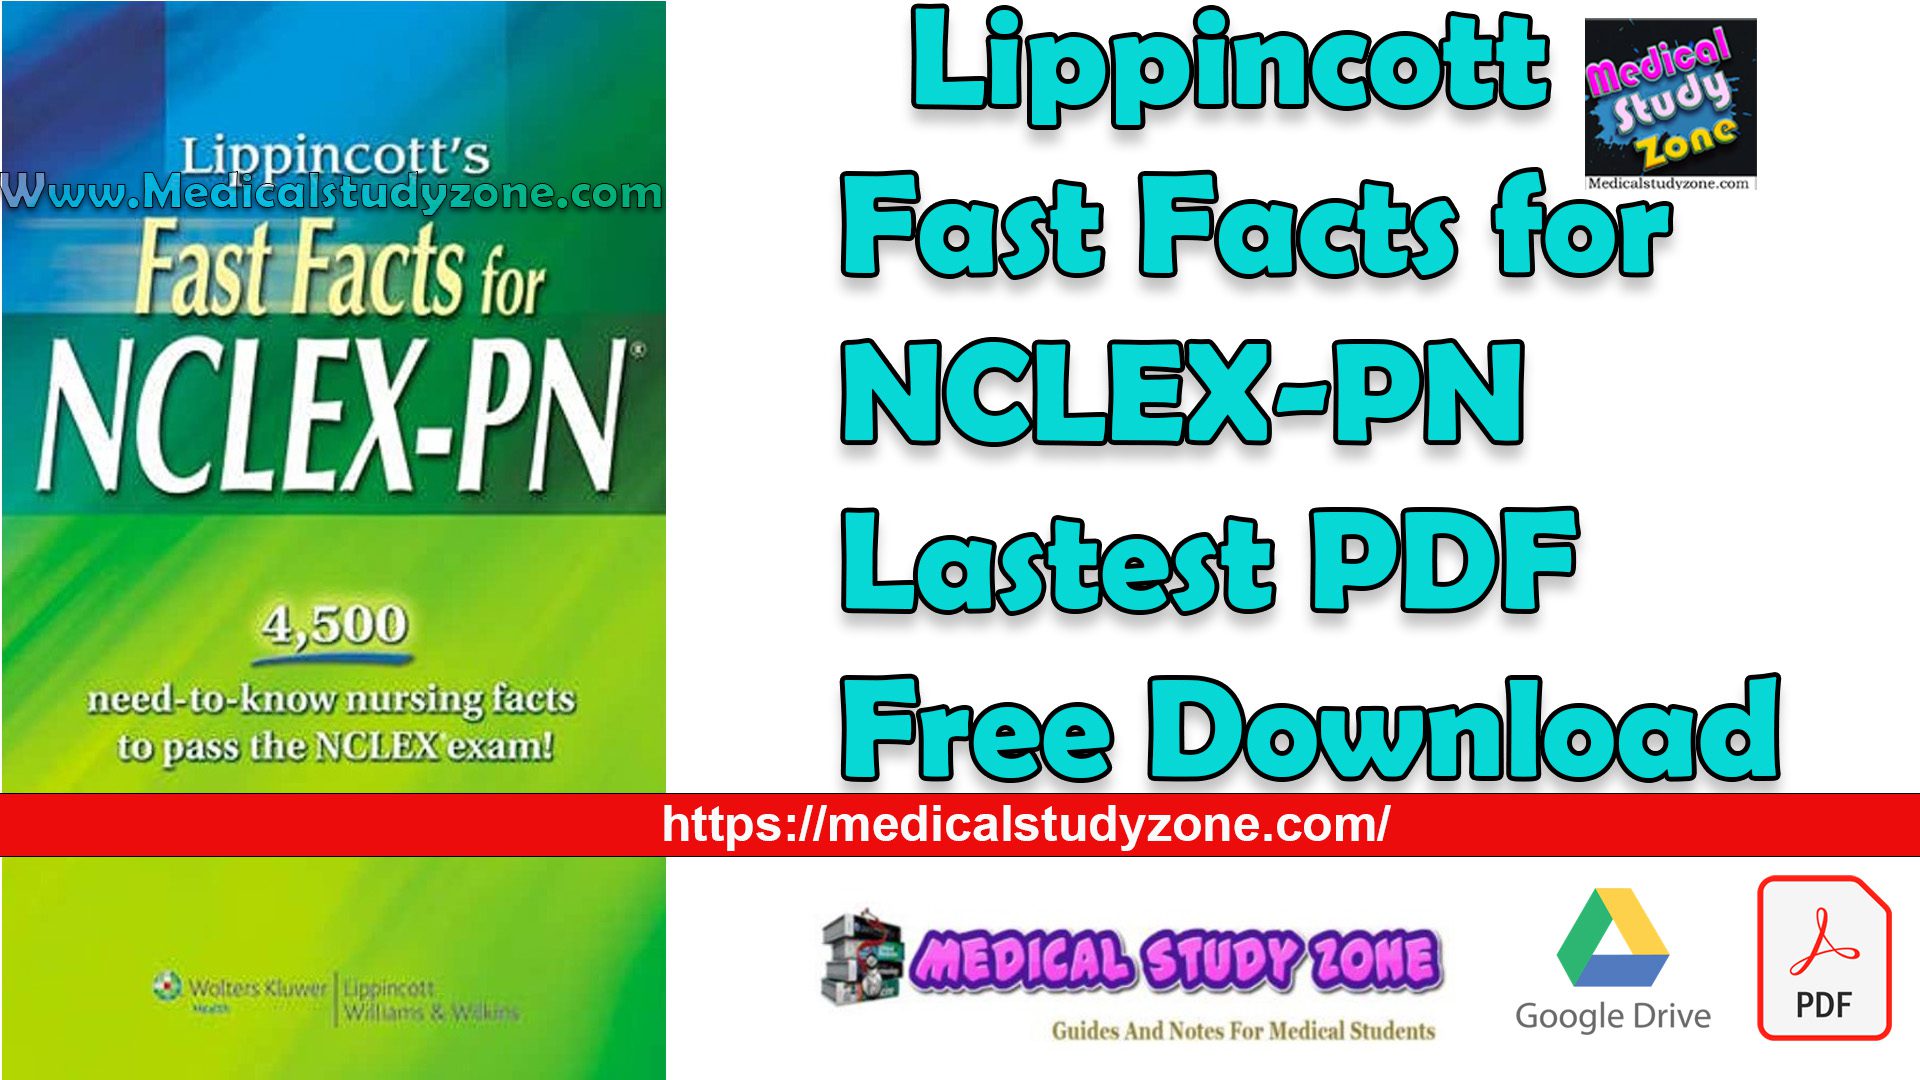 Lippincott's Fast Facts for NCLEX-PN Free Download